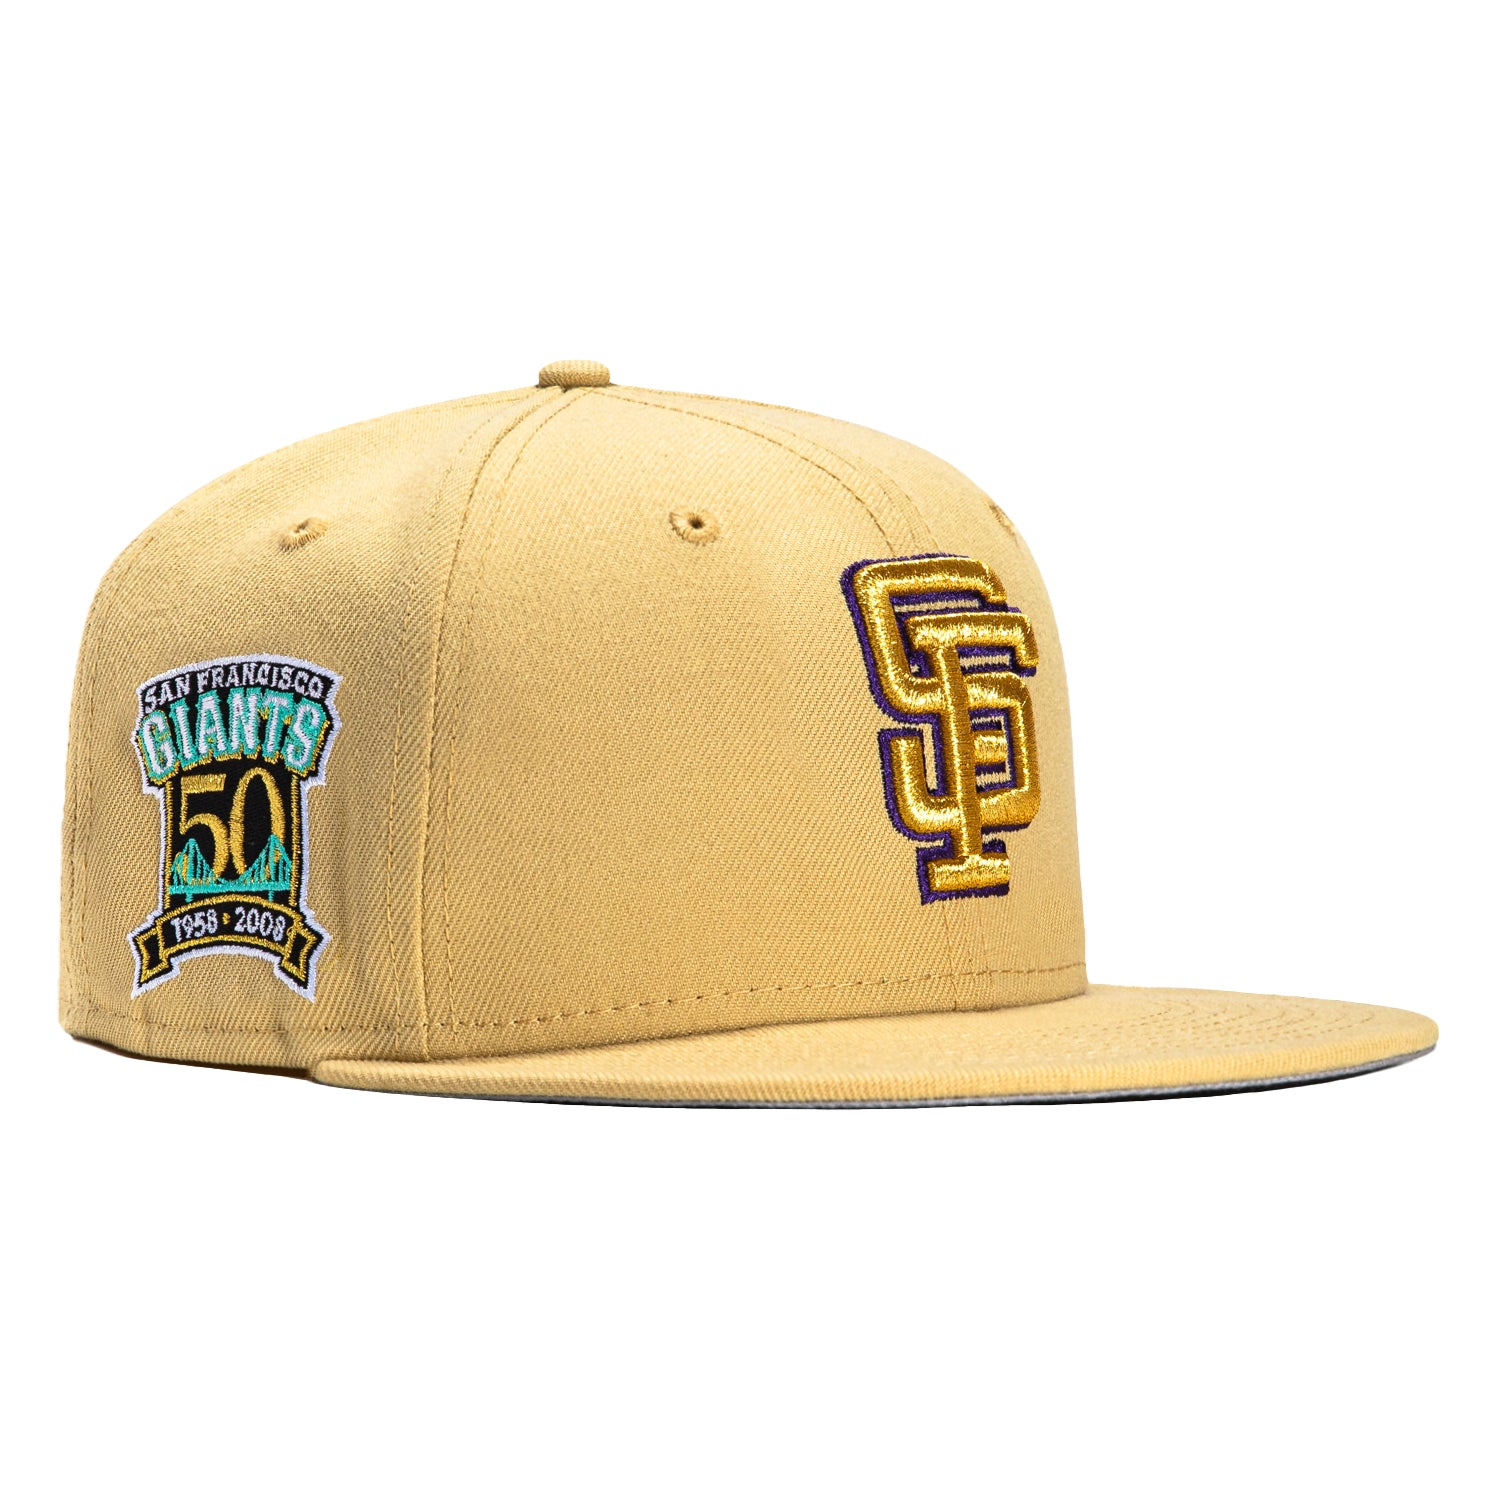 NEW ERA AUTHENTIC COLLECTION OAKLAND ATHLETICS ON-FIELD FITTED HOME HA